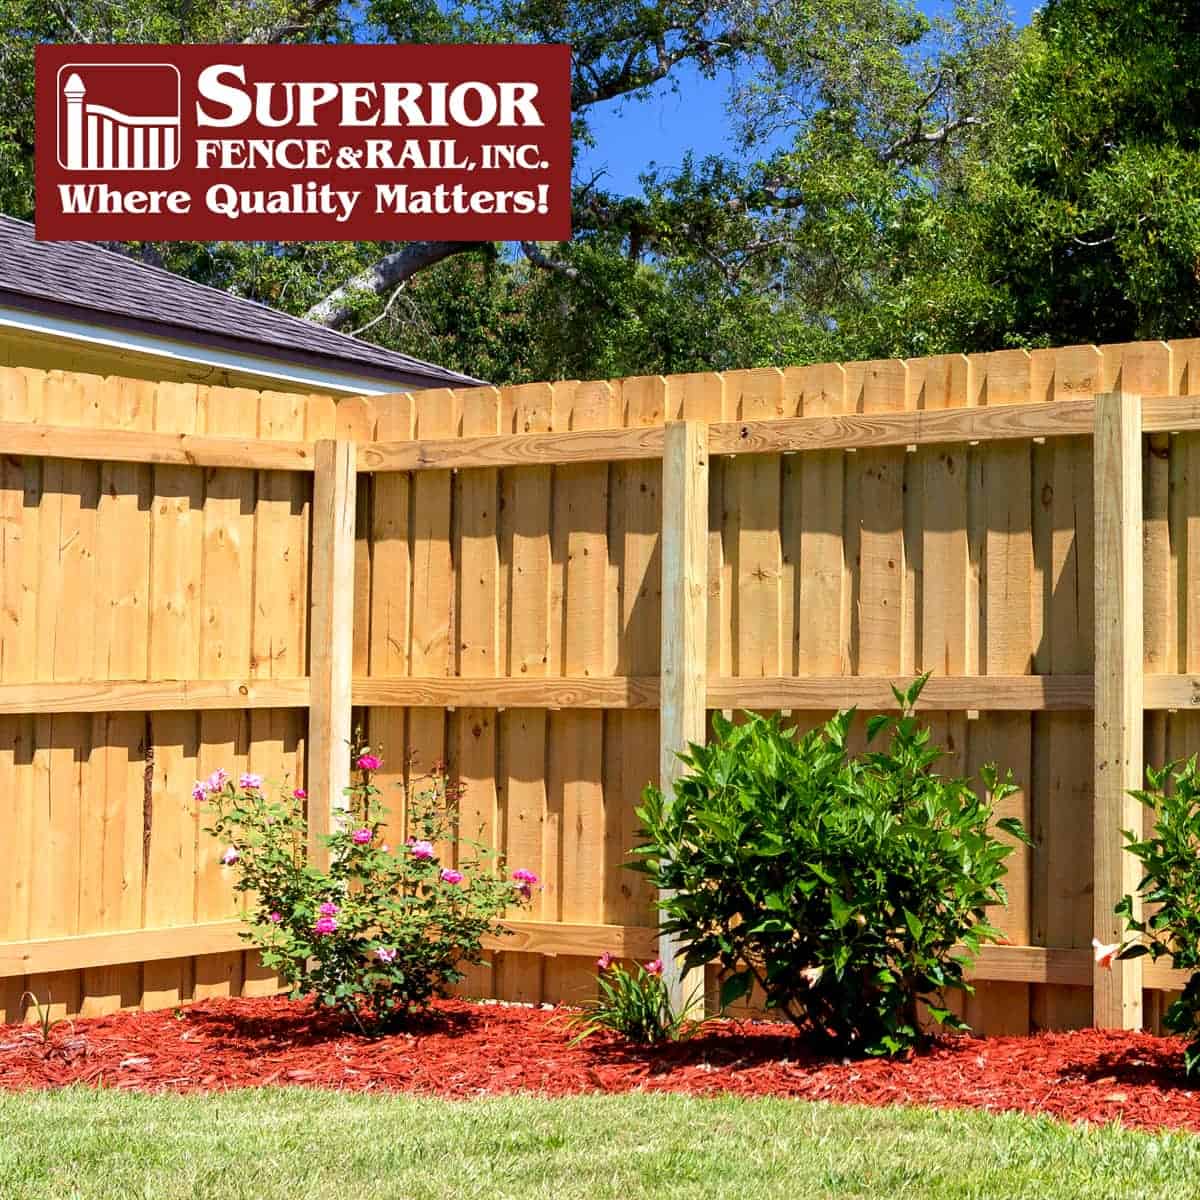 https://www.superiorfenceandrail.com/wp-content/uploads/2023/03/Randolph-fence-company-contractor.jpg